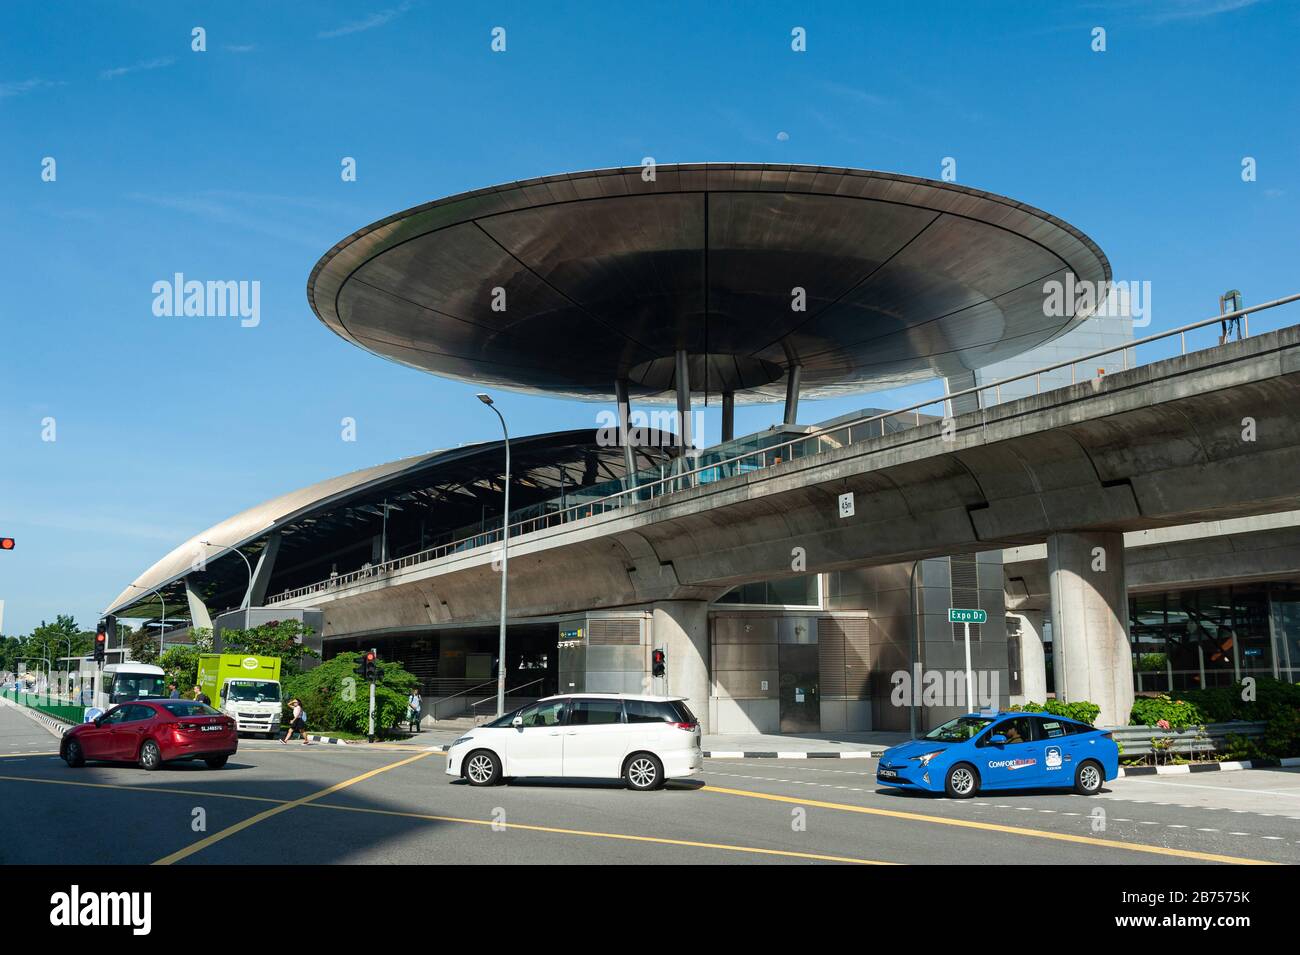 24.05.2019, Singapore, Republic of Singapore, Asia - Exterior view of the Expo stop of the MRT light rail system. The station was designed by the British architect Sir Norman Foster. [automated translation] Stock Photo